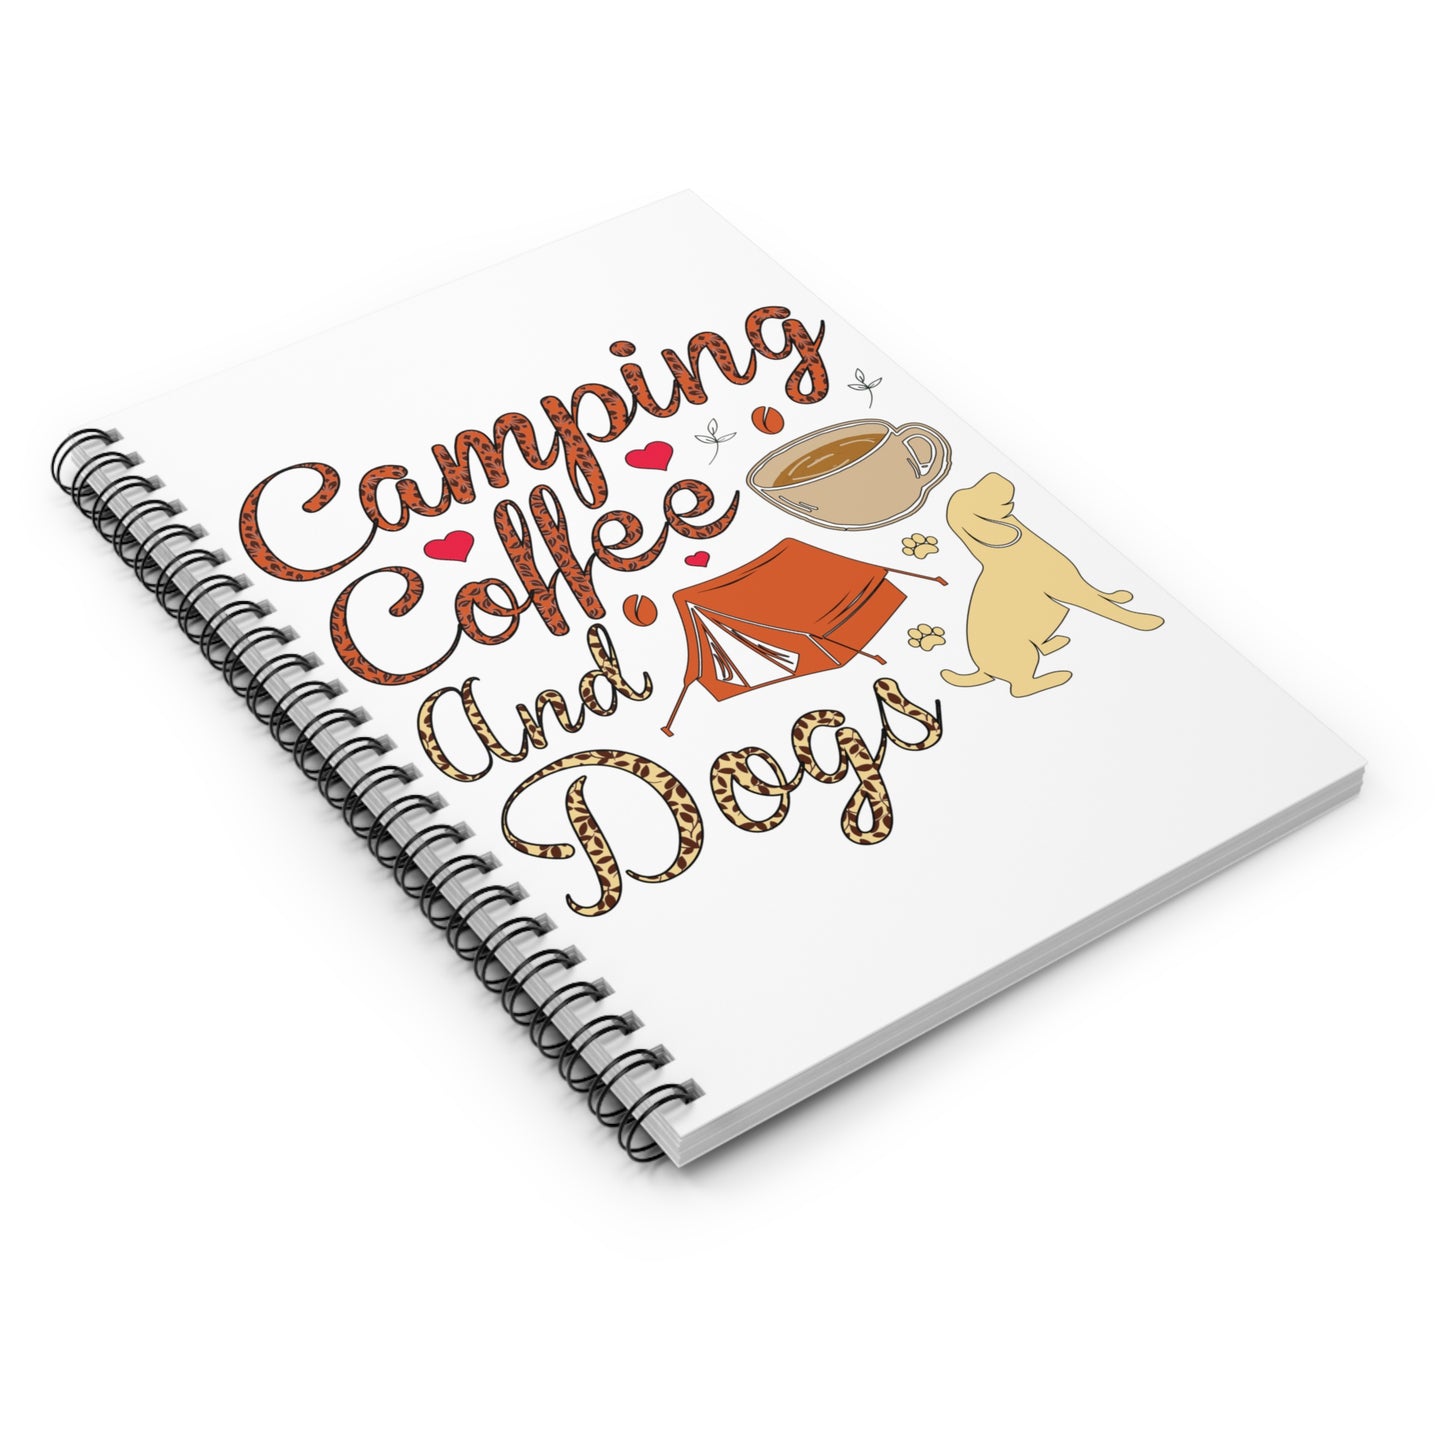 Camping Coffee and Dogs: Spiral Notebook - Log Books - Journals - Diaries - and More Custom Printed by TheGlassyLass